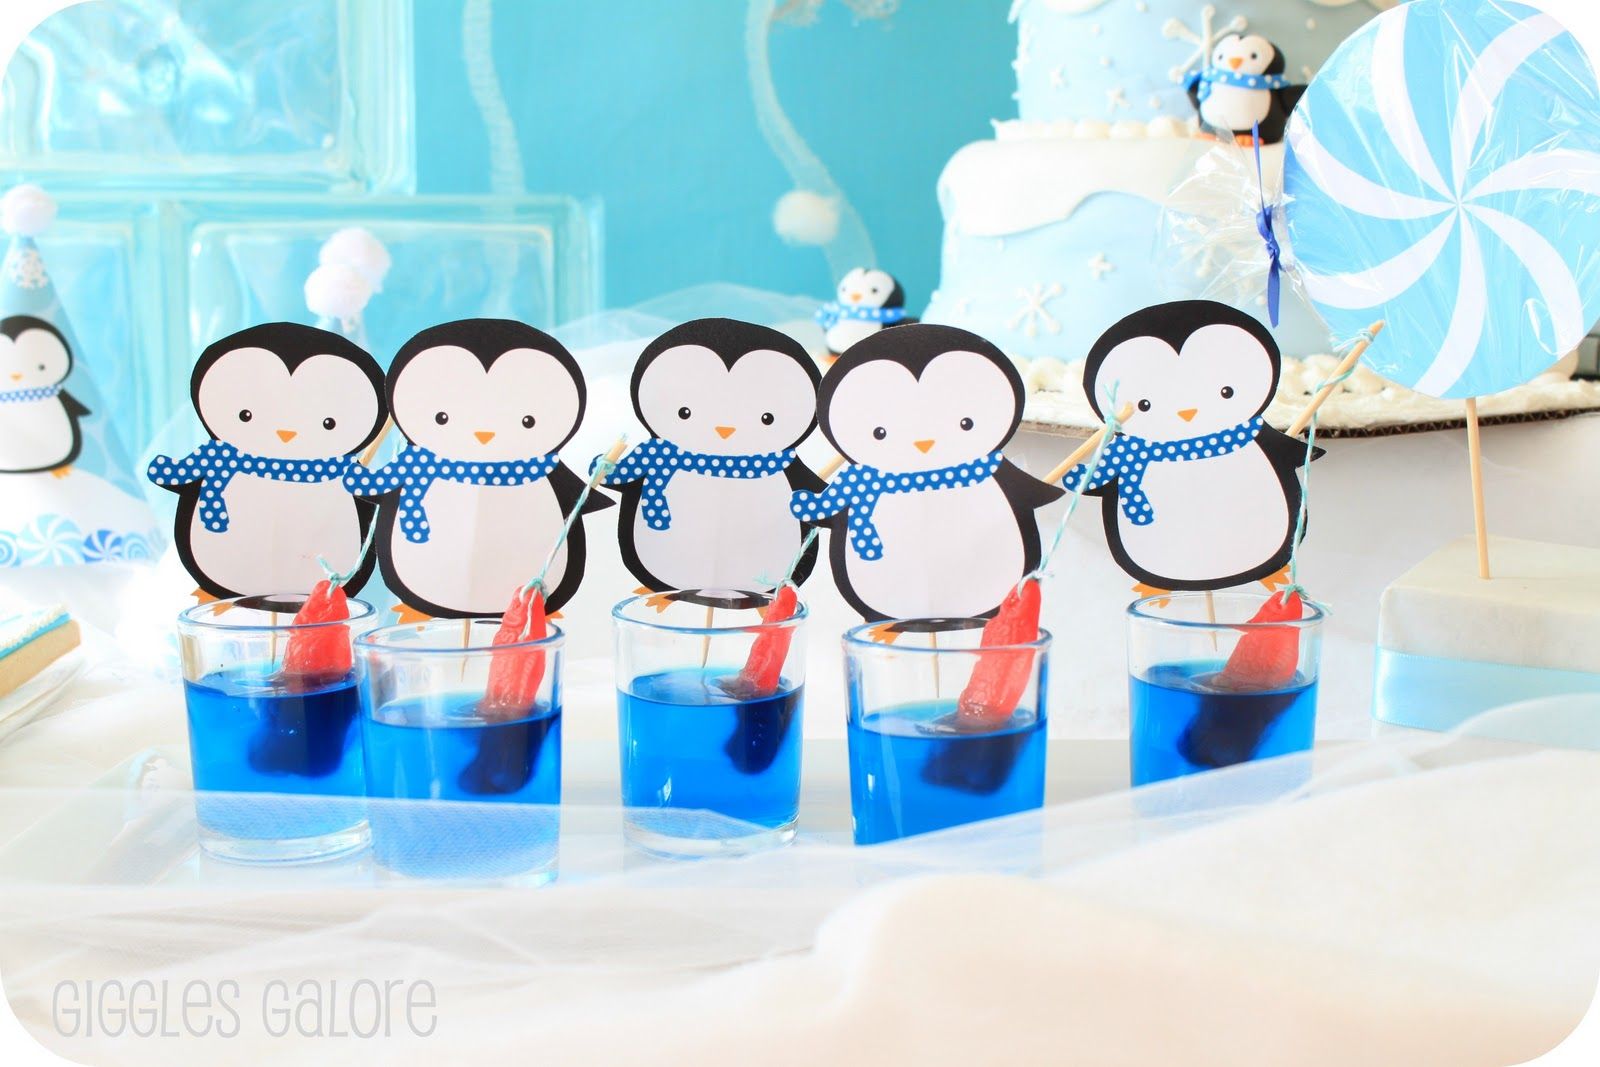 Winter birthday party themes: penguin Jell-o by Giggles Galore